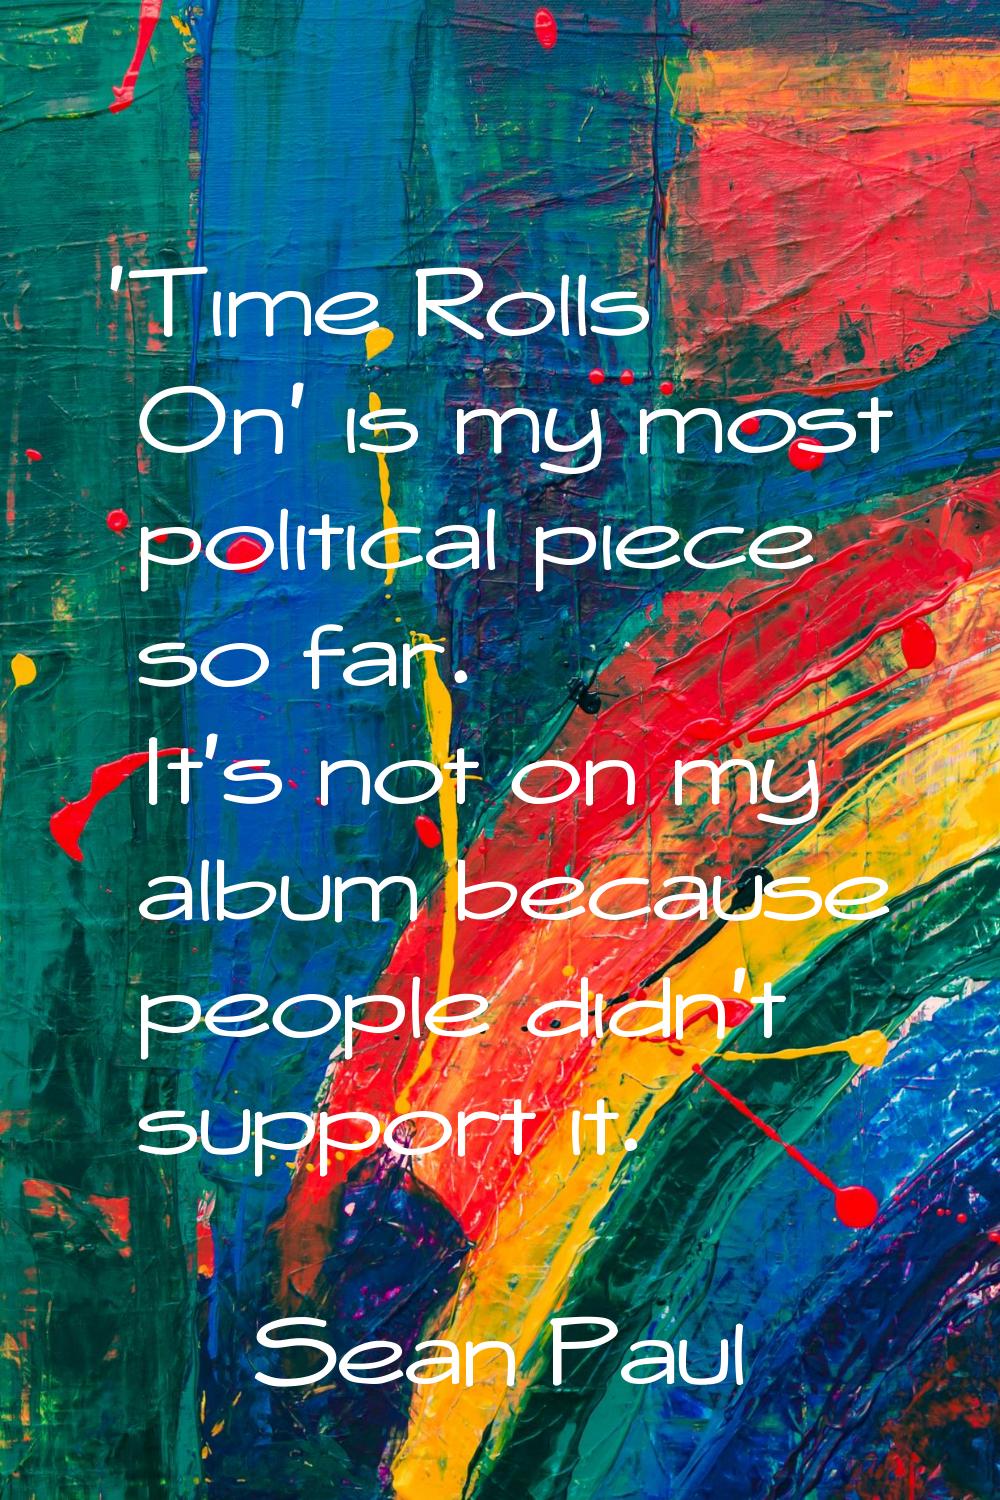 'Time Rolls On' is my most political piece so far. It's not on my album because people didn't suppo